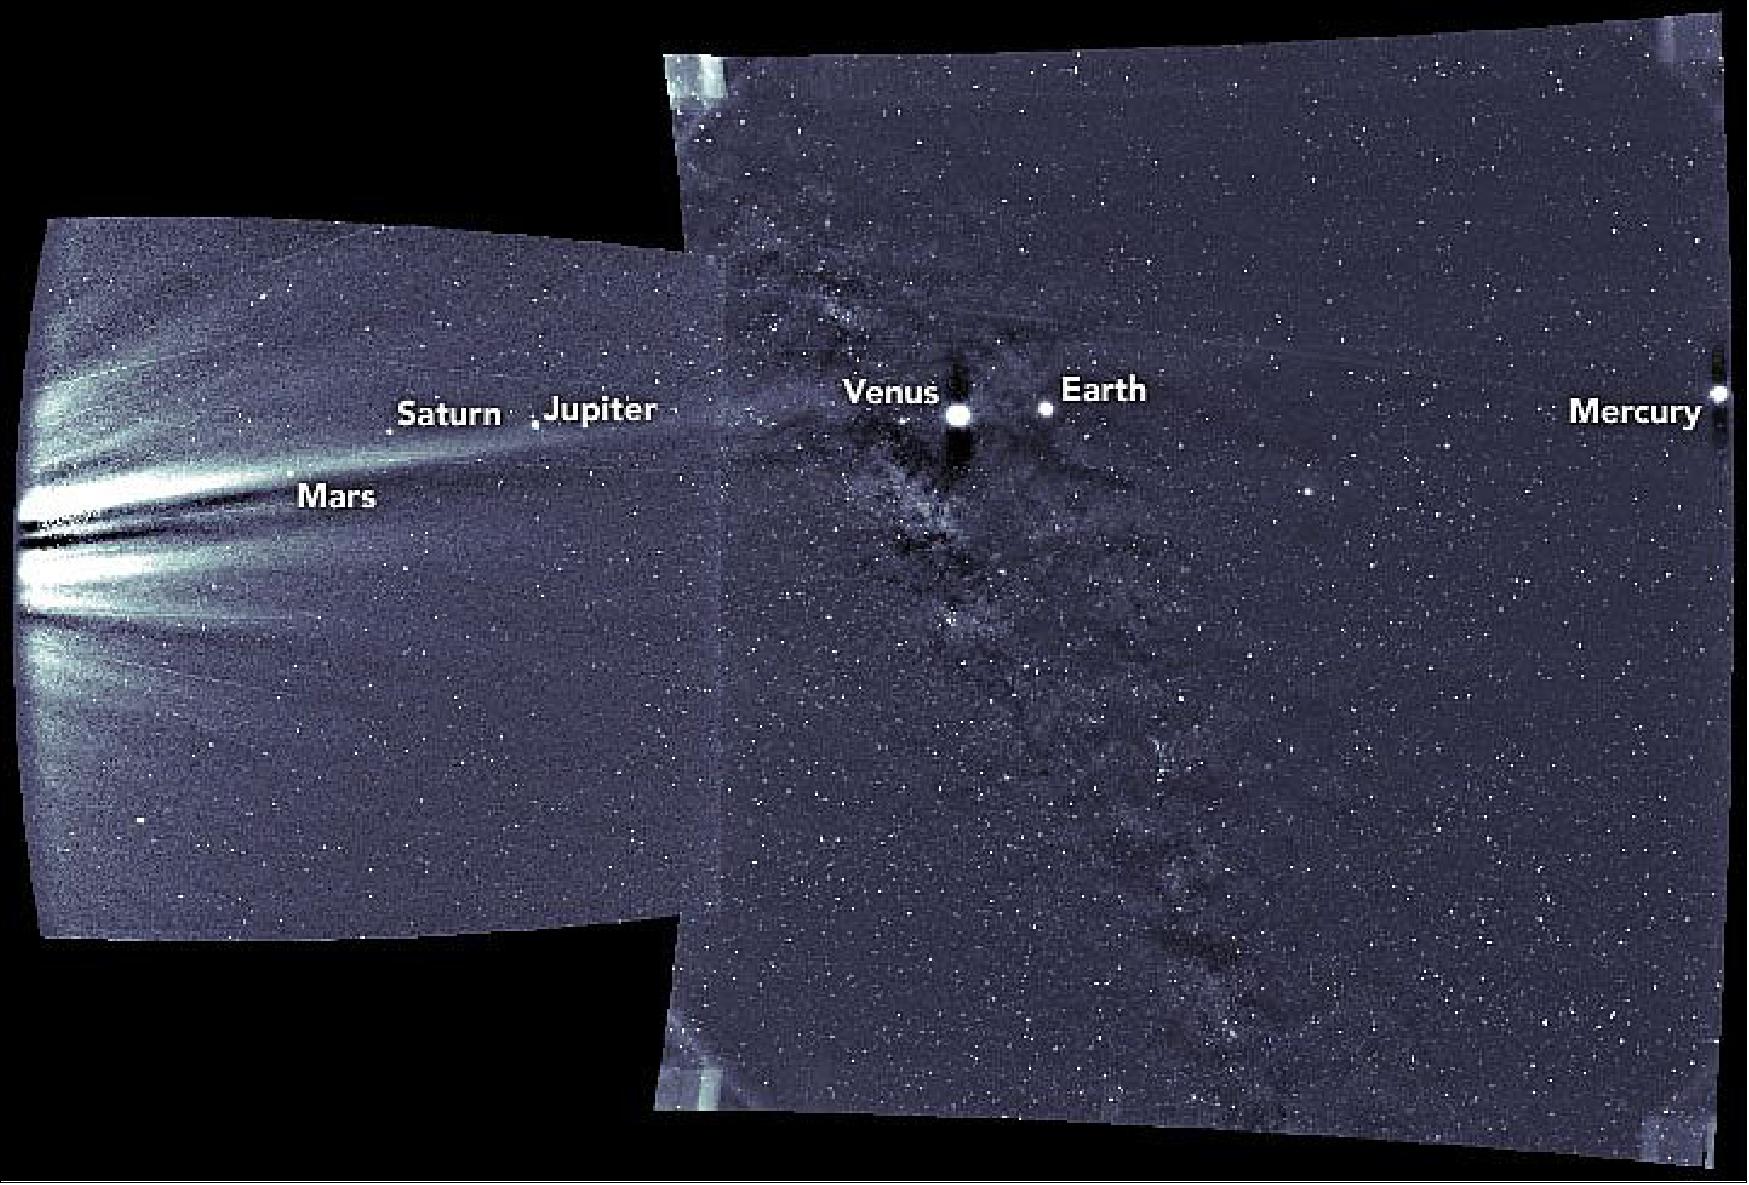 Figure 53: As Parker Solar Probe wheeled around the Sun on June 7, 2020, its Wide-field Imager for Solar Probe instrument (WISPR) snapped two image frames that captured six planets: Mars, Saturn, Jupiter, Venus, Earth, and Mercury (image credit: NASA Earth Observatory)